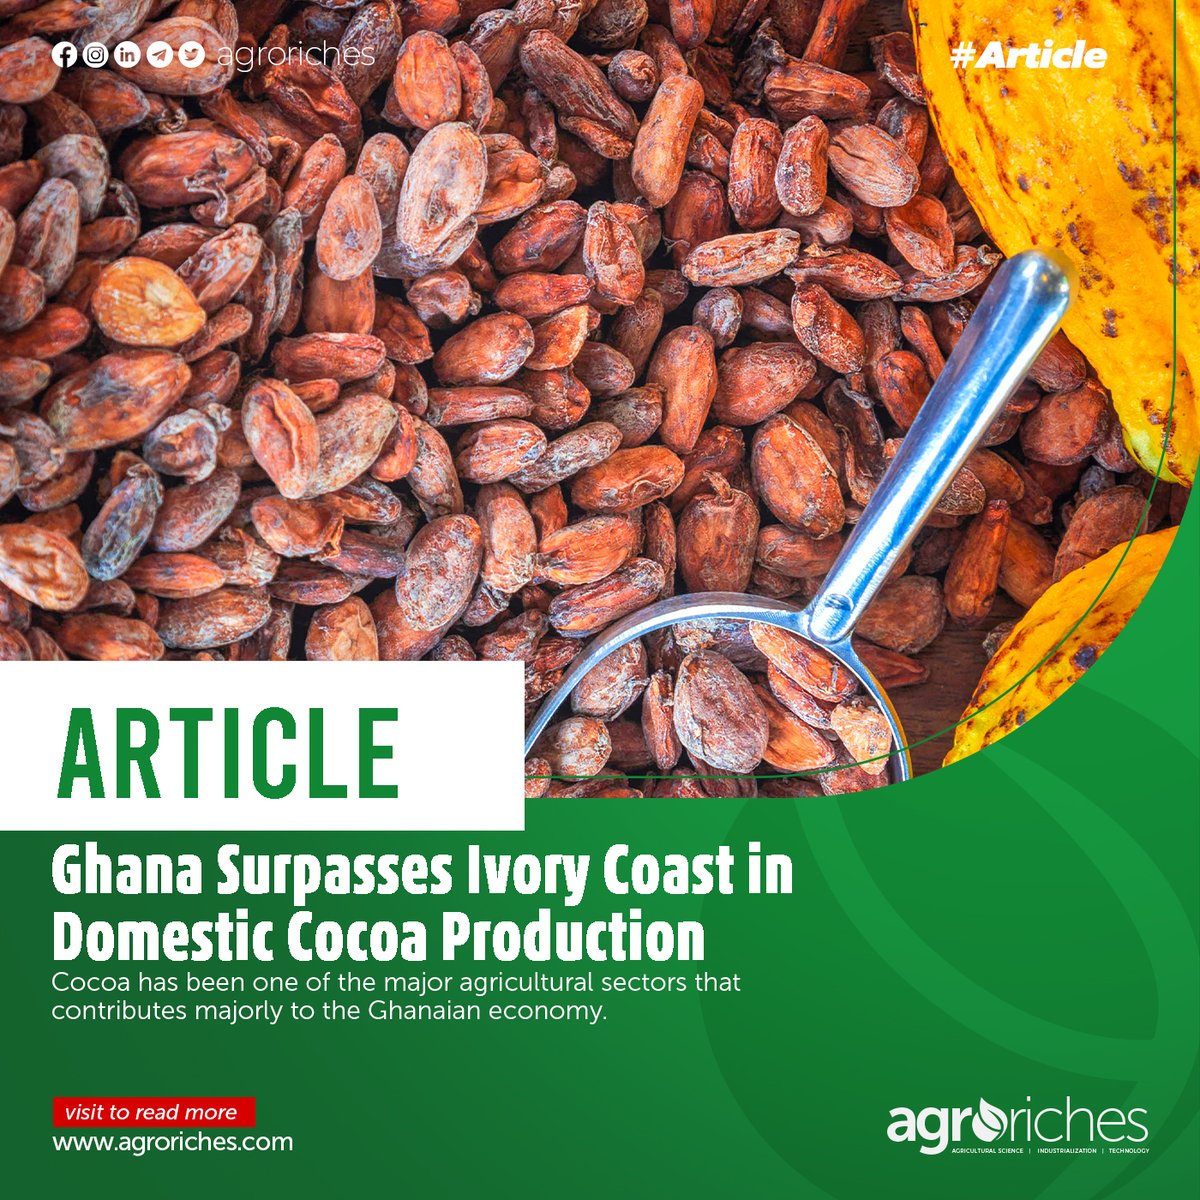 Ghana surpasses Ivory Coast in cocoa production.
Visit our website, agroriches.com to read more.

#agroriches #agriculturaltrends #agriculturenews #african #women #agricultureinghana #ghana #articles #farming #growth #food #agriculture #technology